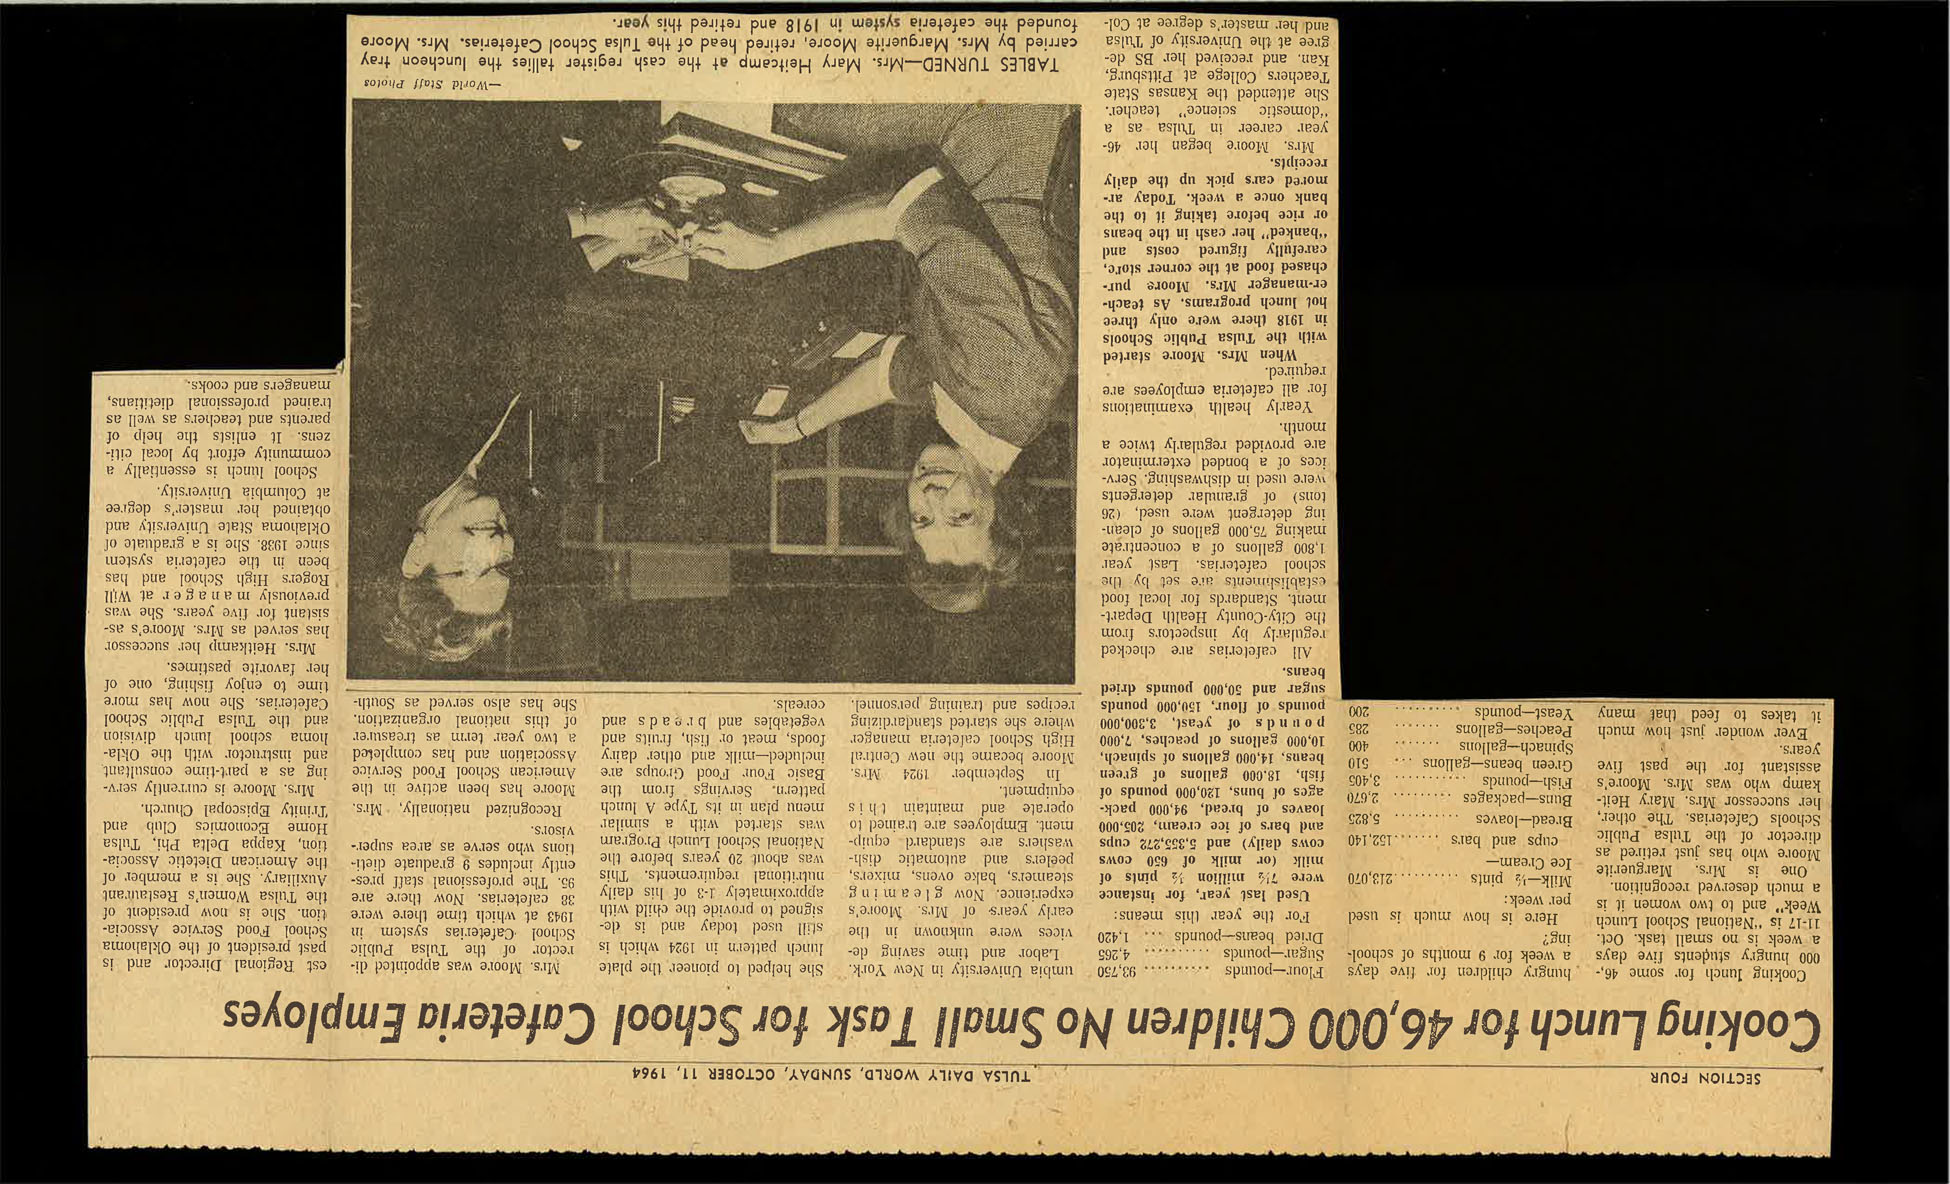 1964article